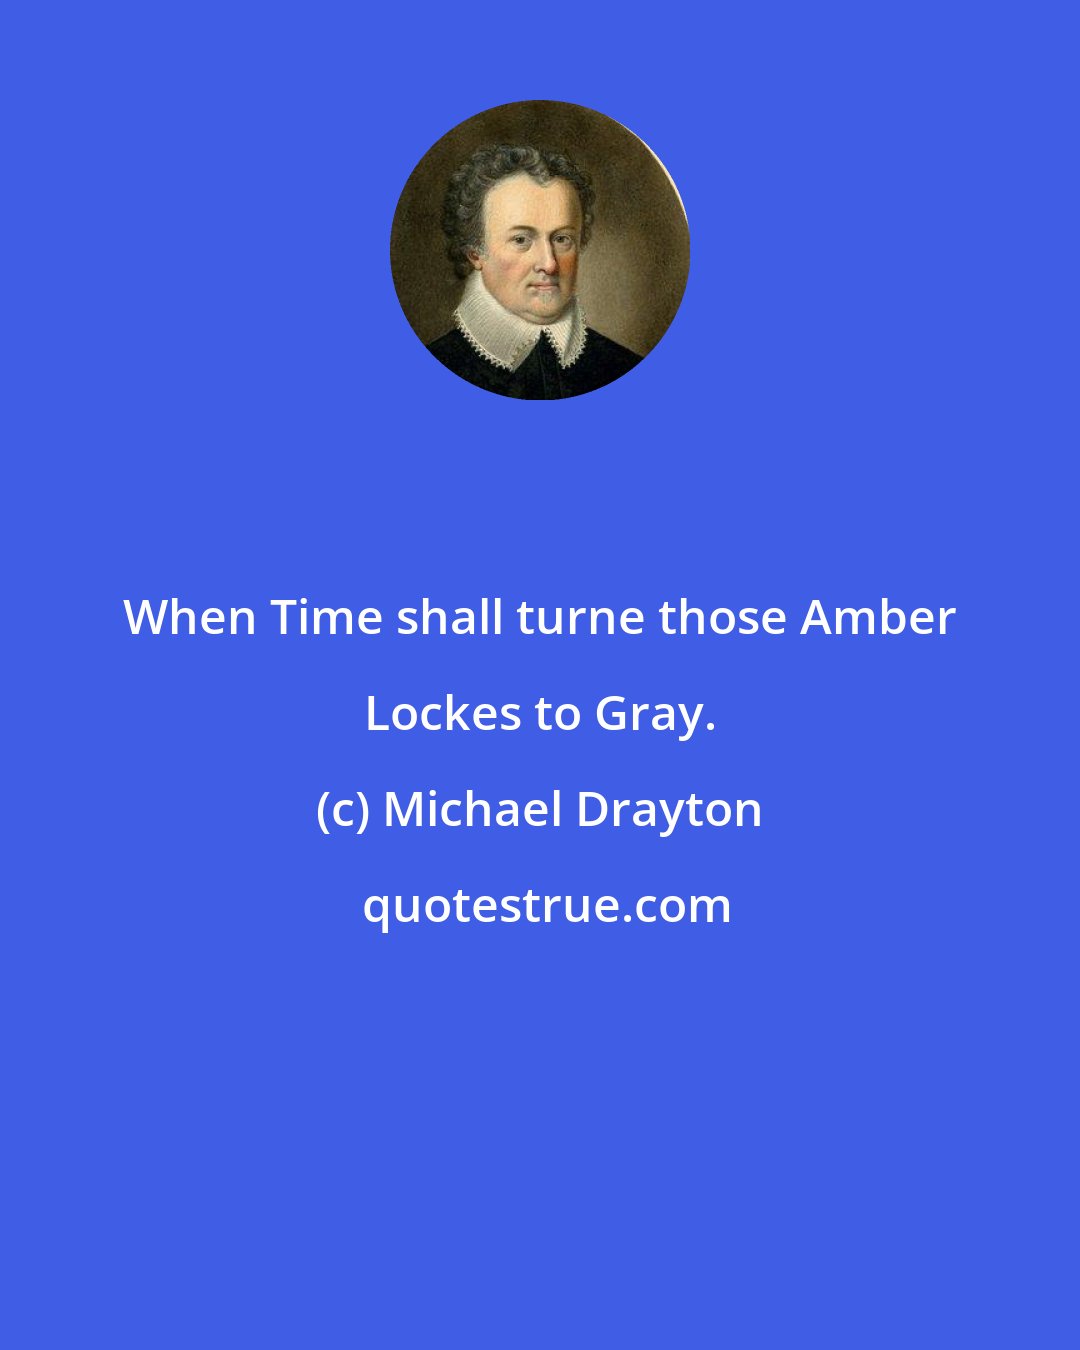 Michael Drayton: When Time shall turne those Amber Lockes to Gray.